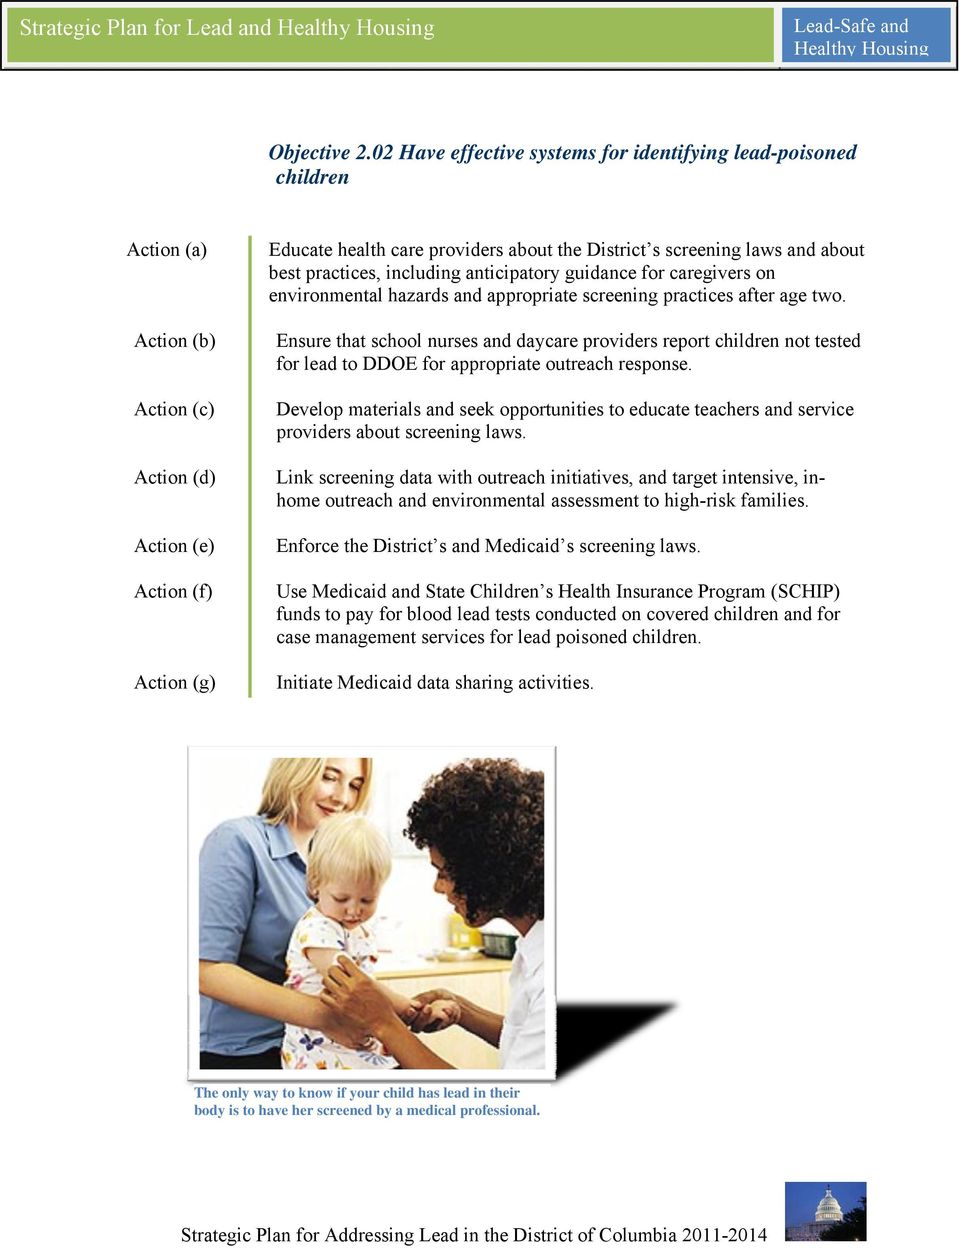 practices, including anticipatory guidance for caregivers on environmental hazards and appropriate screening practices after age two.